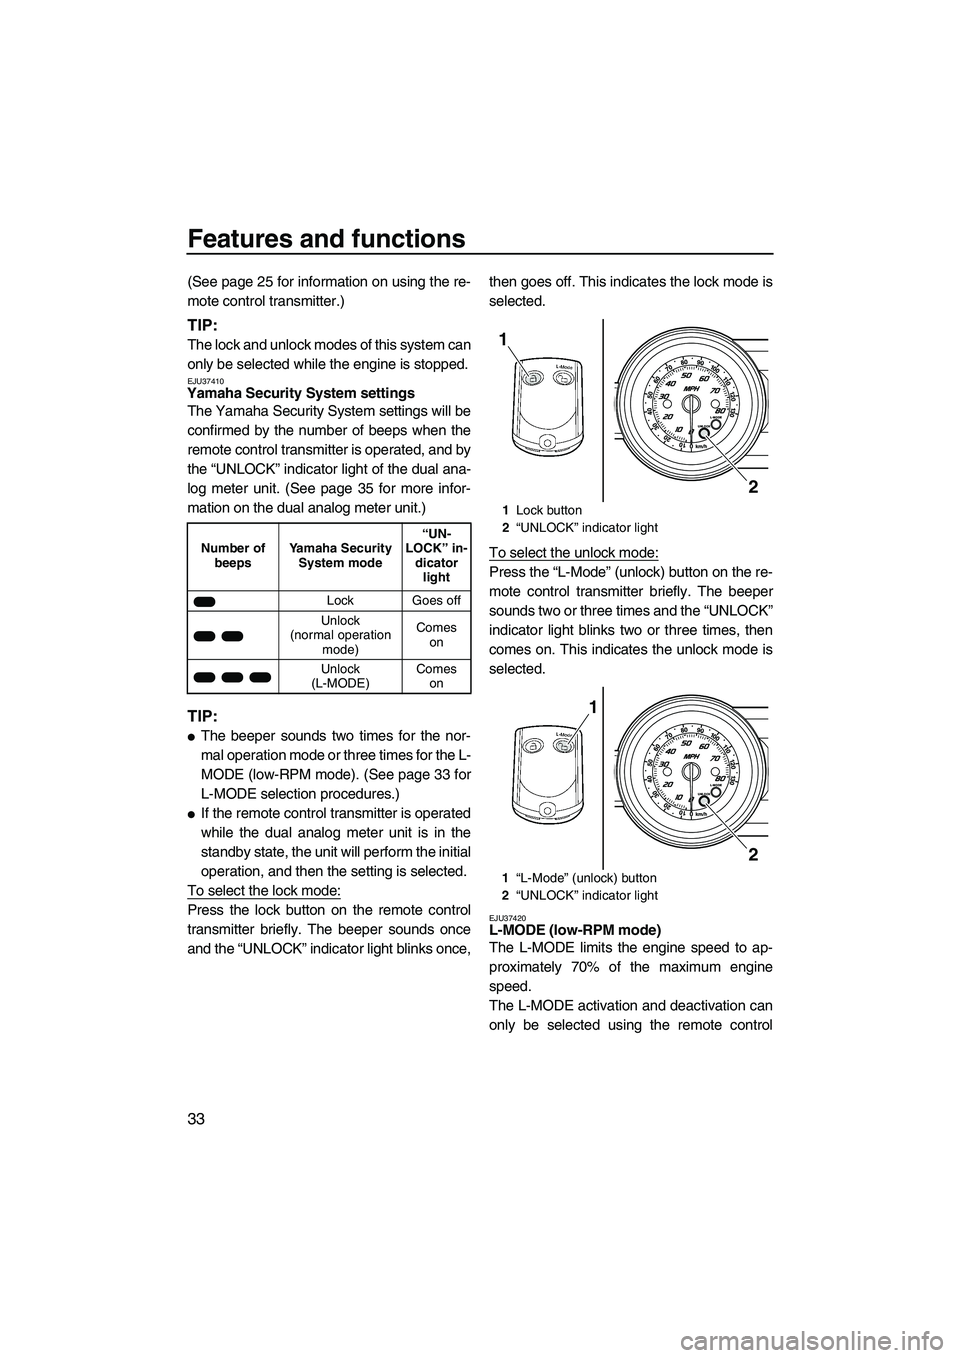 YAMAHA FZS SVHO 2009  Owners Manual Features and functions
33
(See page 25 for information on using the re-
mote control transmitter.)
TIP:
The lock and unlock modes of this system can
only be selected while the engine is stopped.
EJU37